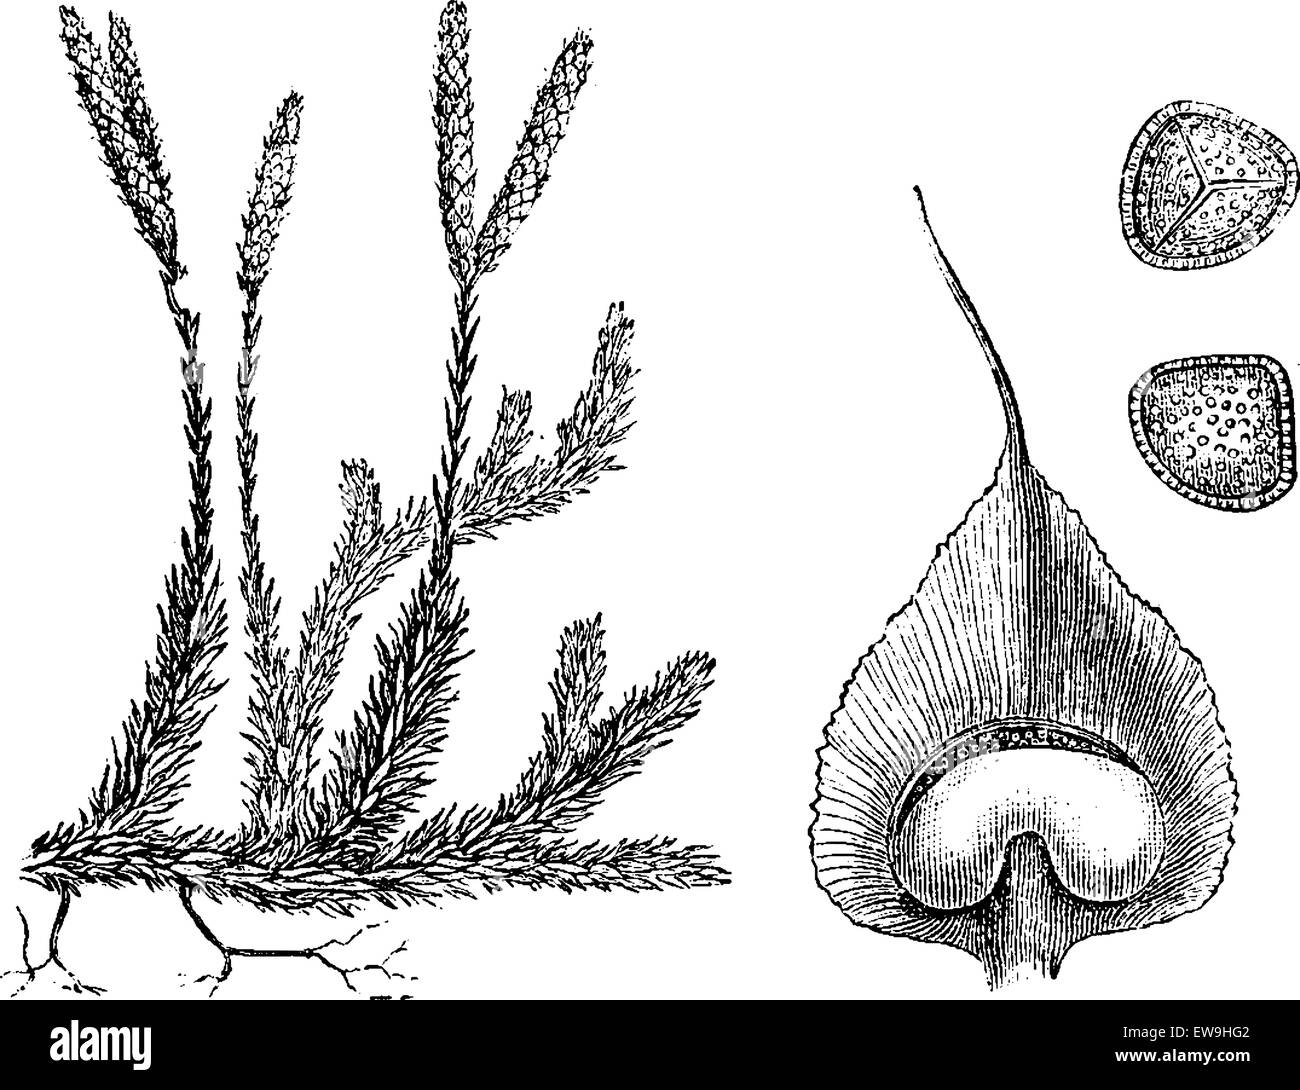 Lycopodium or Ground pines or Creeping cedar, vintage engraved illustration. Usual Medicine Dictionary - Paul Labarthe - 1885. Stock Vector